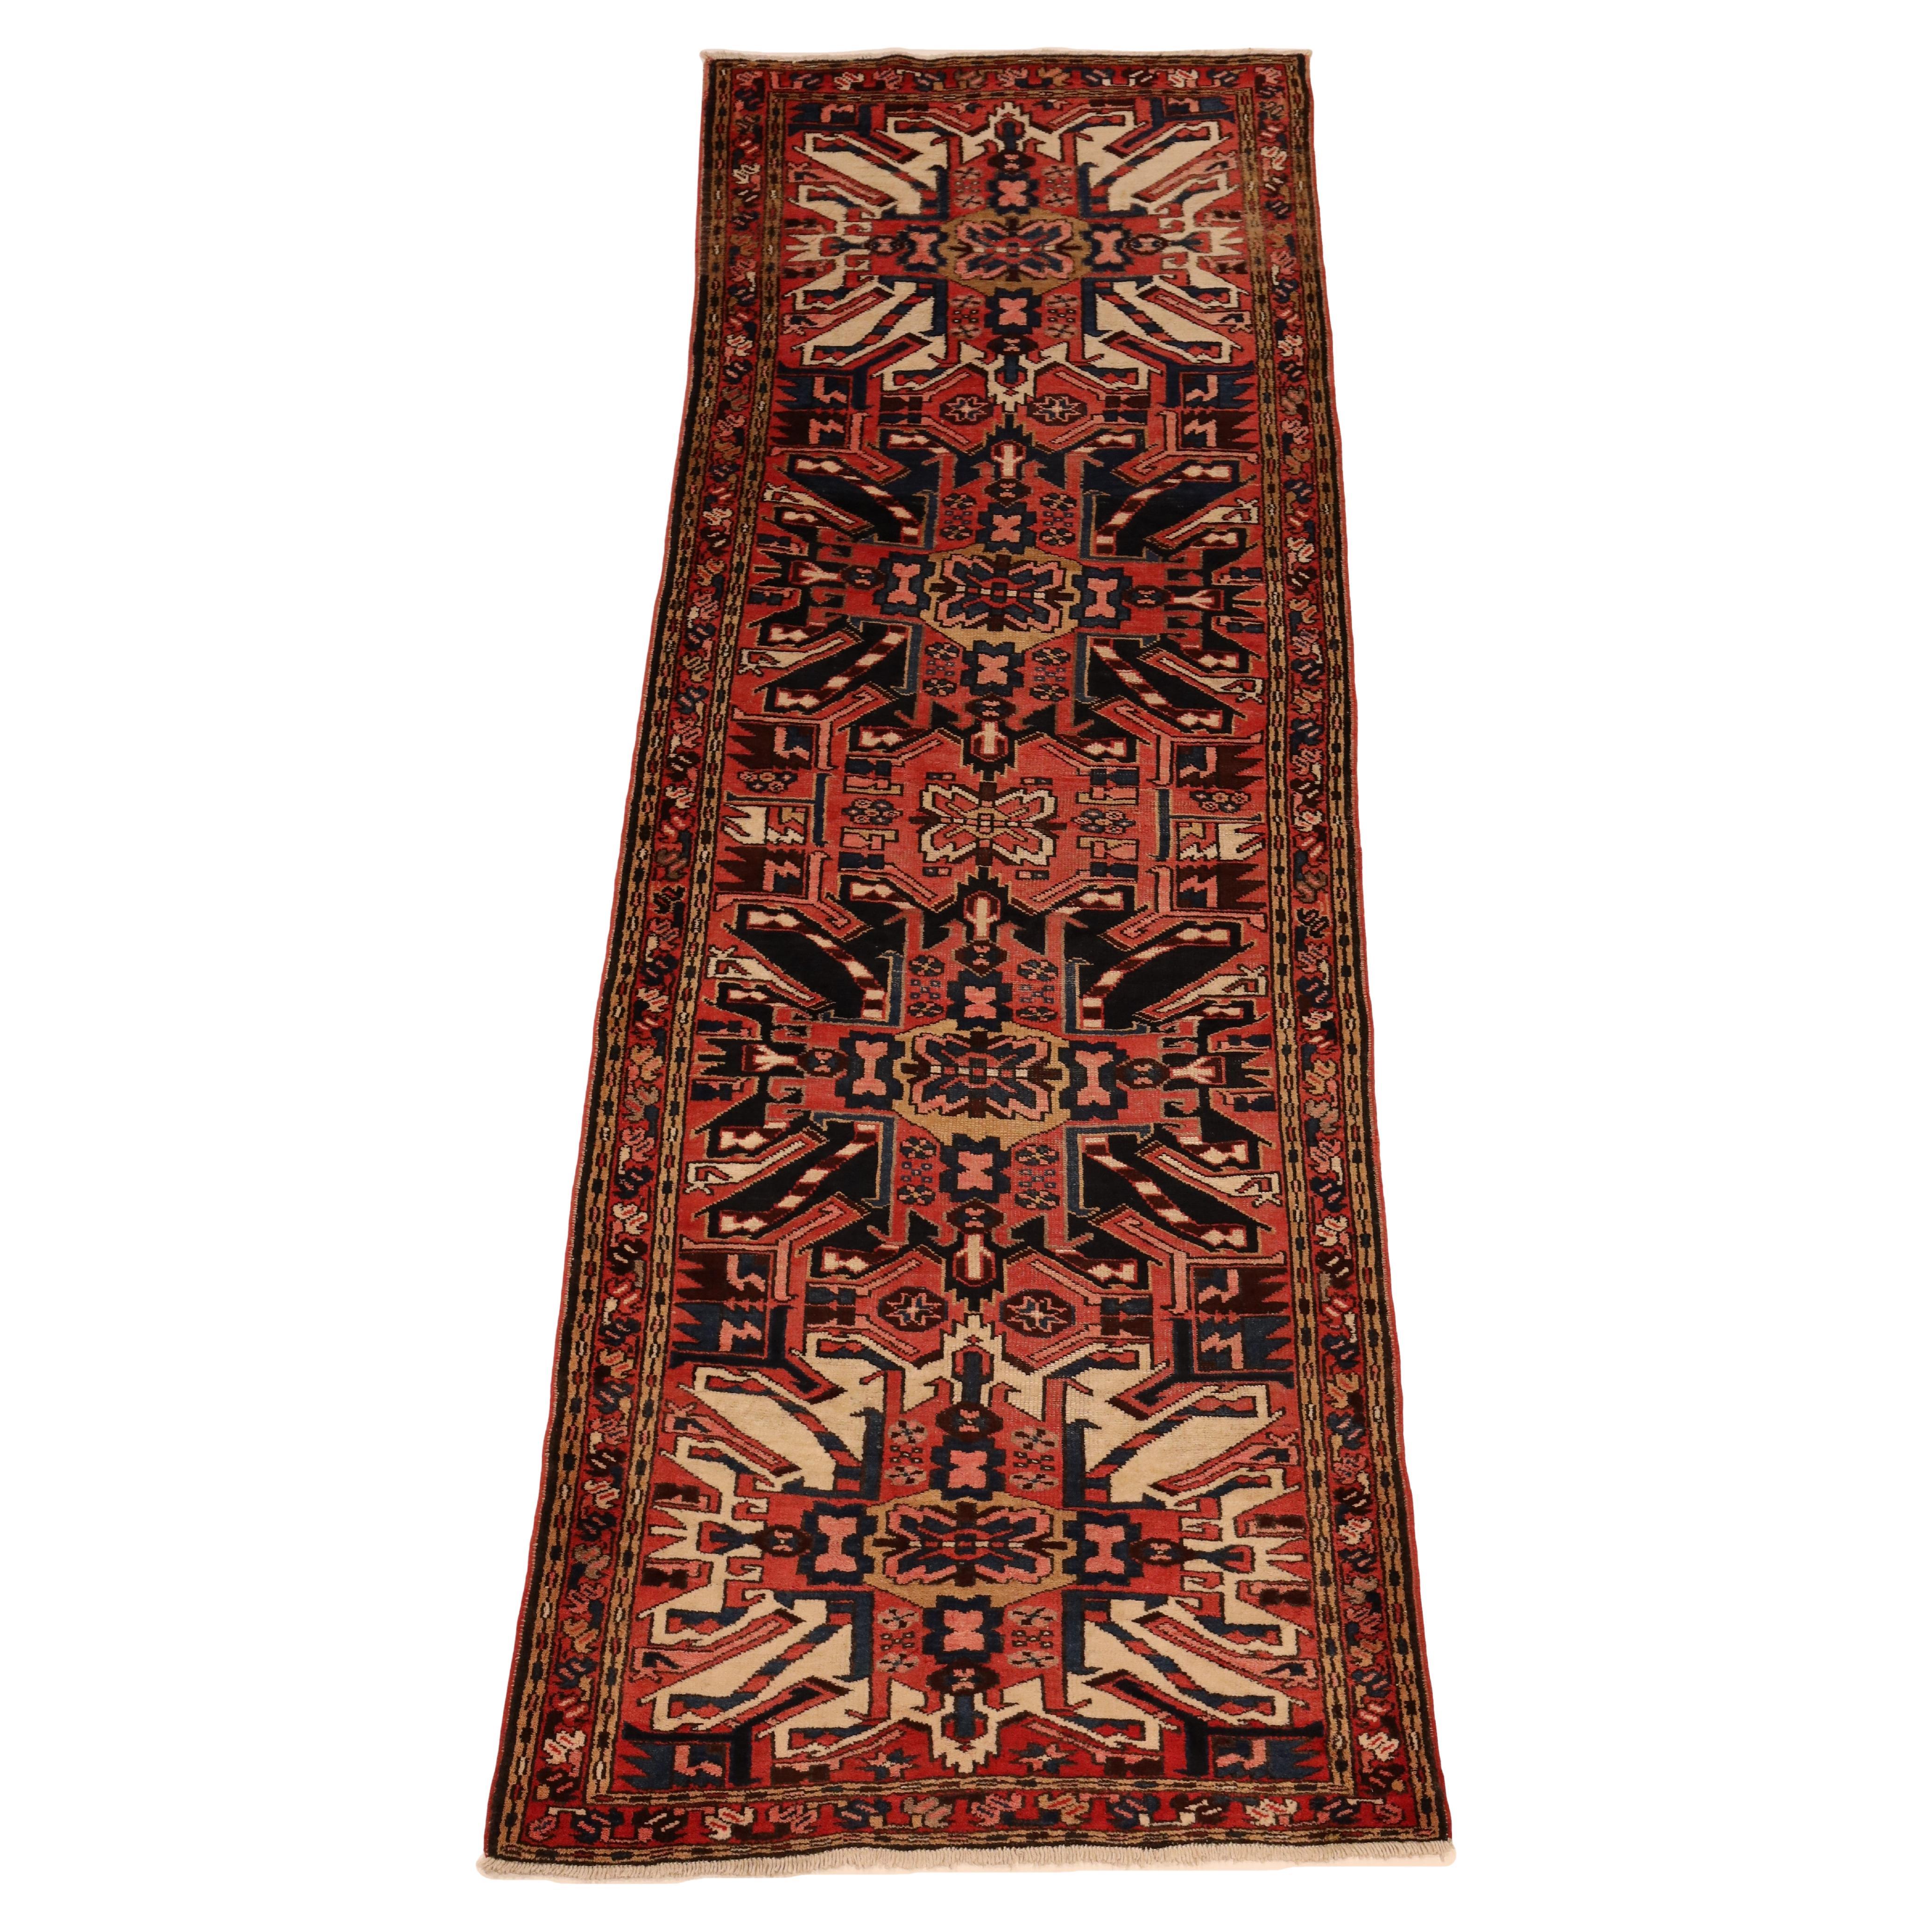 North-West Persian Runner - 3'5" x 10'6"